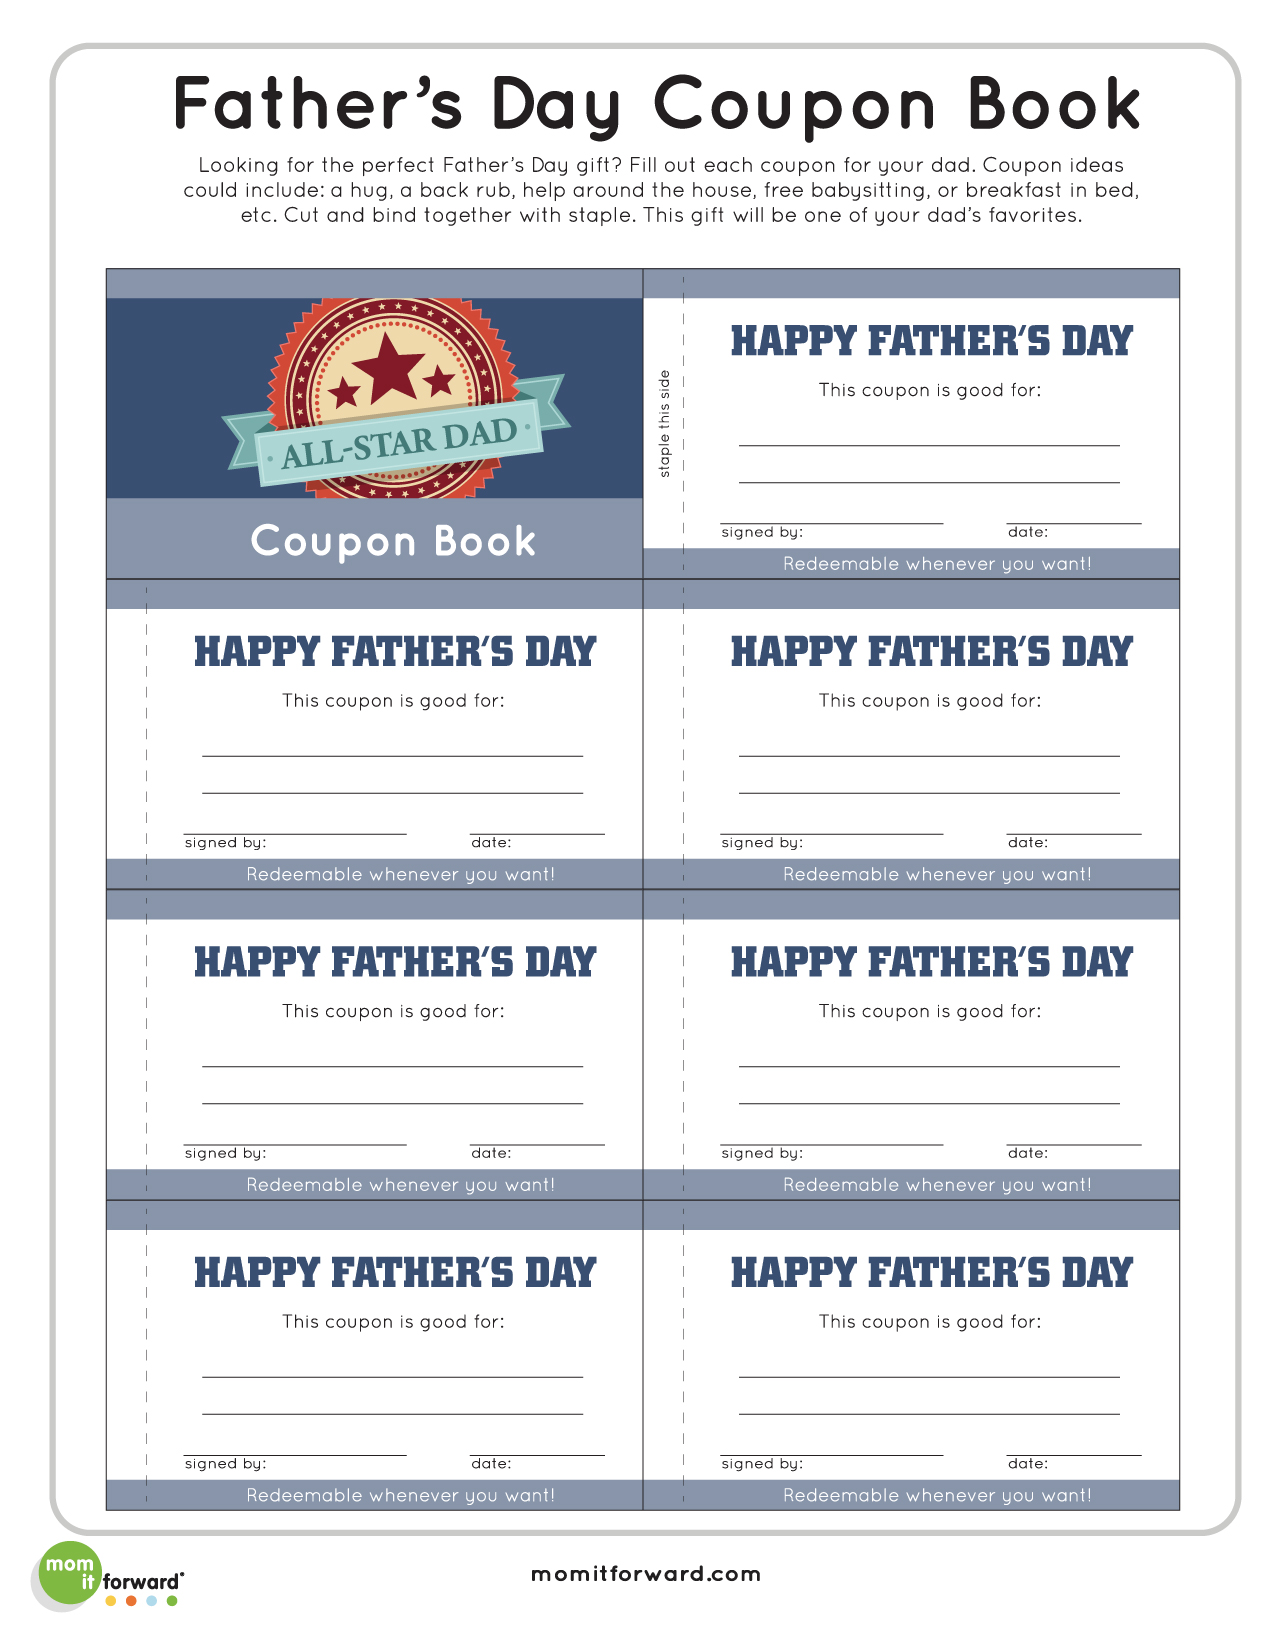 Father's Day Coupon Book PrintableMom it Forward